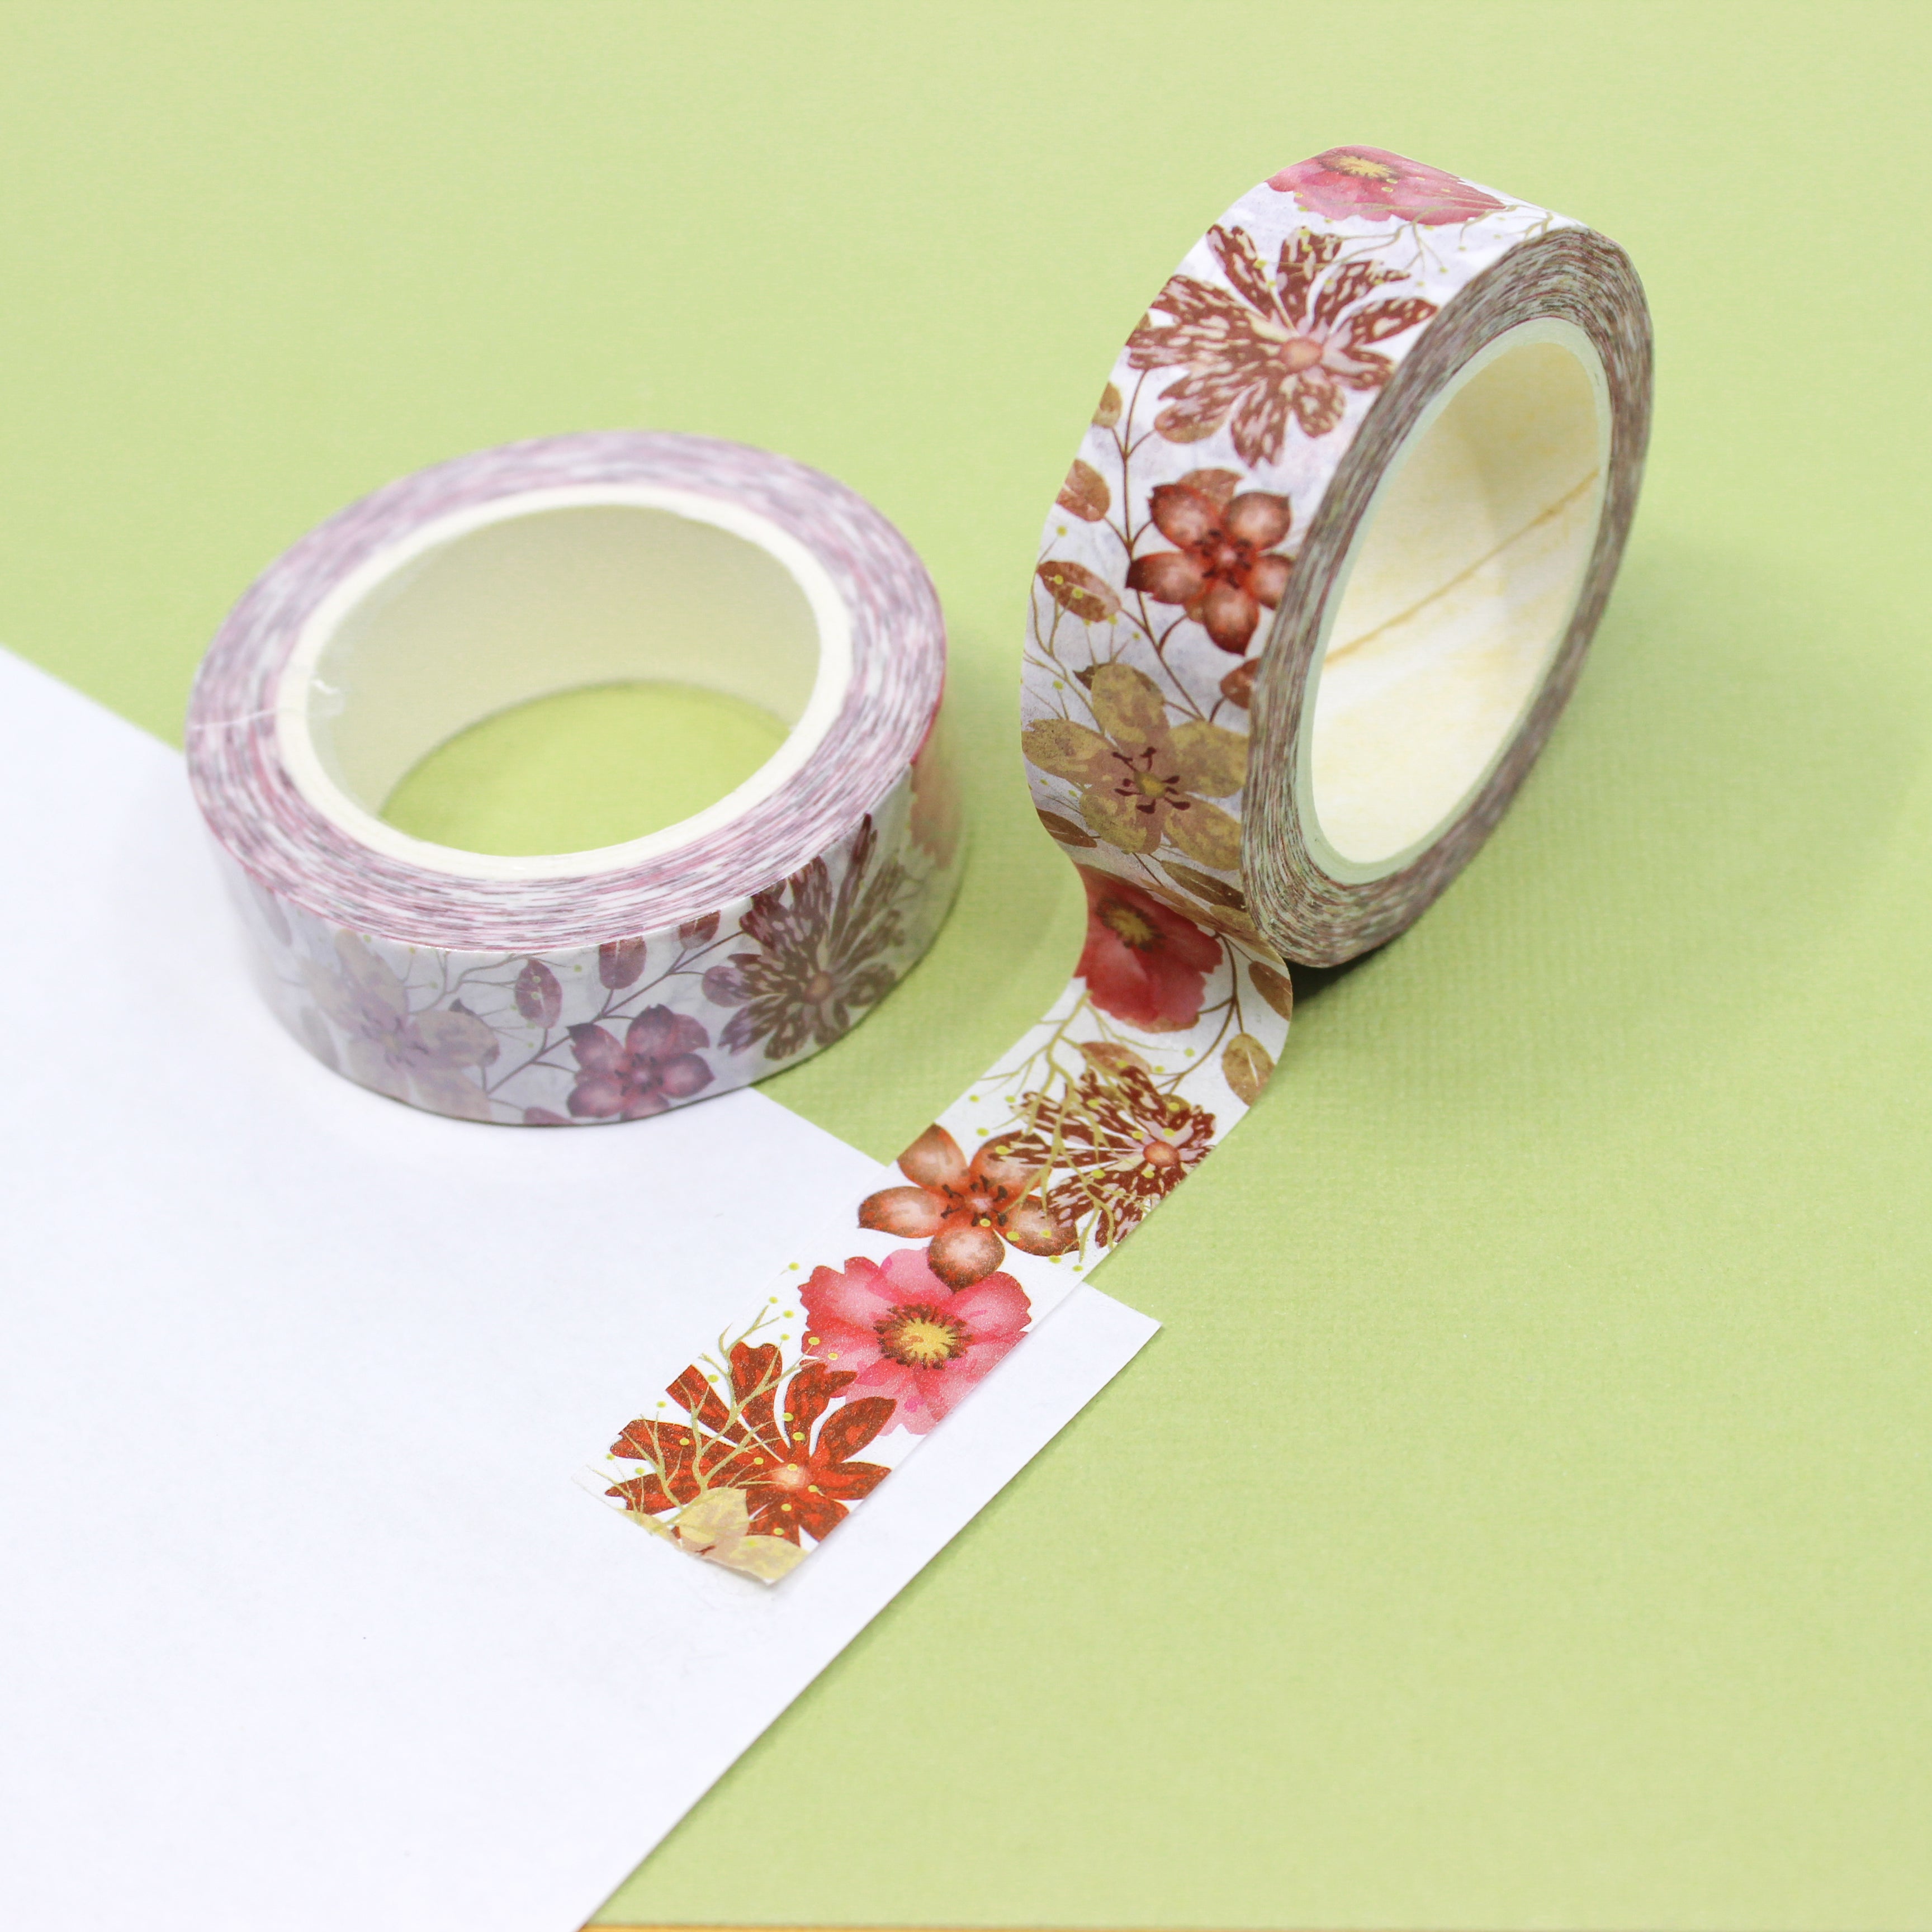 levate your projects with our captivating floral washi tape, showcasing charming flower motifs that bring a sense of freshness and vibrancy to your crafts. This tape is sold at BBB Supplies Craft Shop.